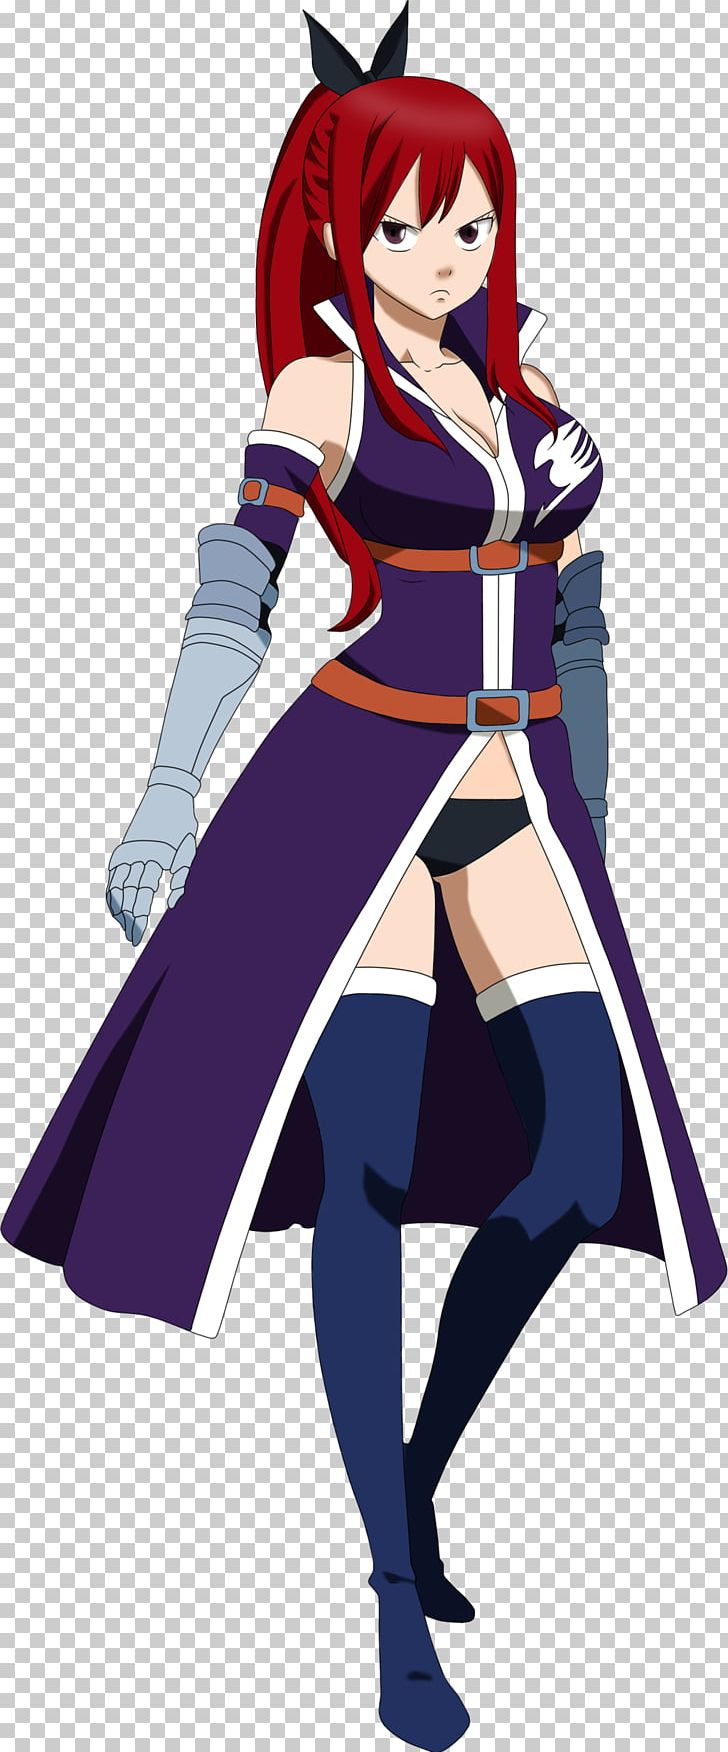 Erza Scarlet Natsu Dragneel Gray Fullbuster Juvia Lockser Fairy Tail PNG, Clipart, Anime, Art, Cartoon, Clothing, Cosplay Free PNG Download